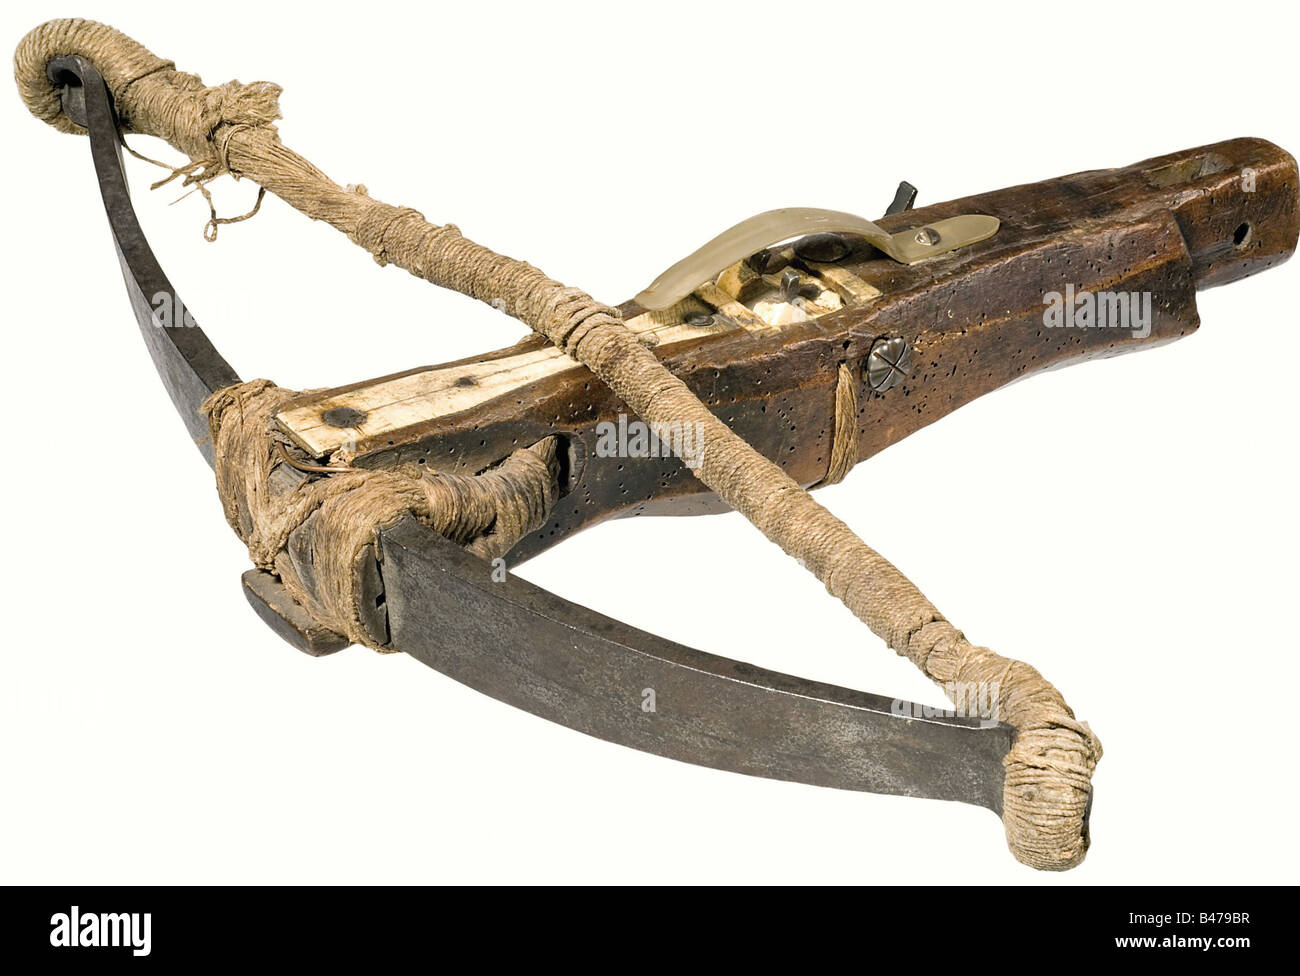 A crossbow, German, 17th century. Heavy, iron prod with smith mark stamped into one side (hunting horn). Fastened to the tiller by cord, old hemp bowstring. Walnut tiller (worm damage). The end has a mounting socket. Bone quarrel channel with a horn quarrel retainer. The nut is made of bone and lashed in place with cord. Iron trigger mechanism on the side for release by a trip wire. Length 45 cm. A rare type of crossbow, which was set at dens while hunting fox and badger, but especially used for securing buildings against unauthorized entrance. historic, histor, Stock Photo